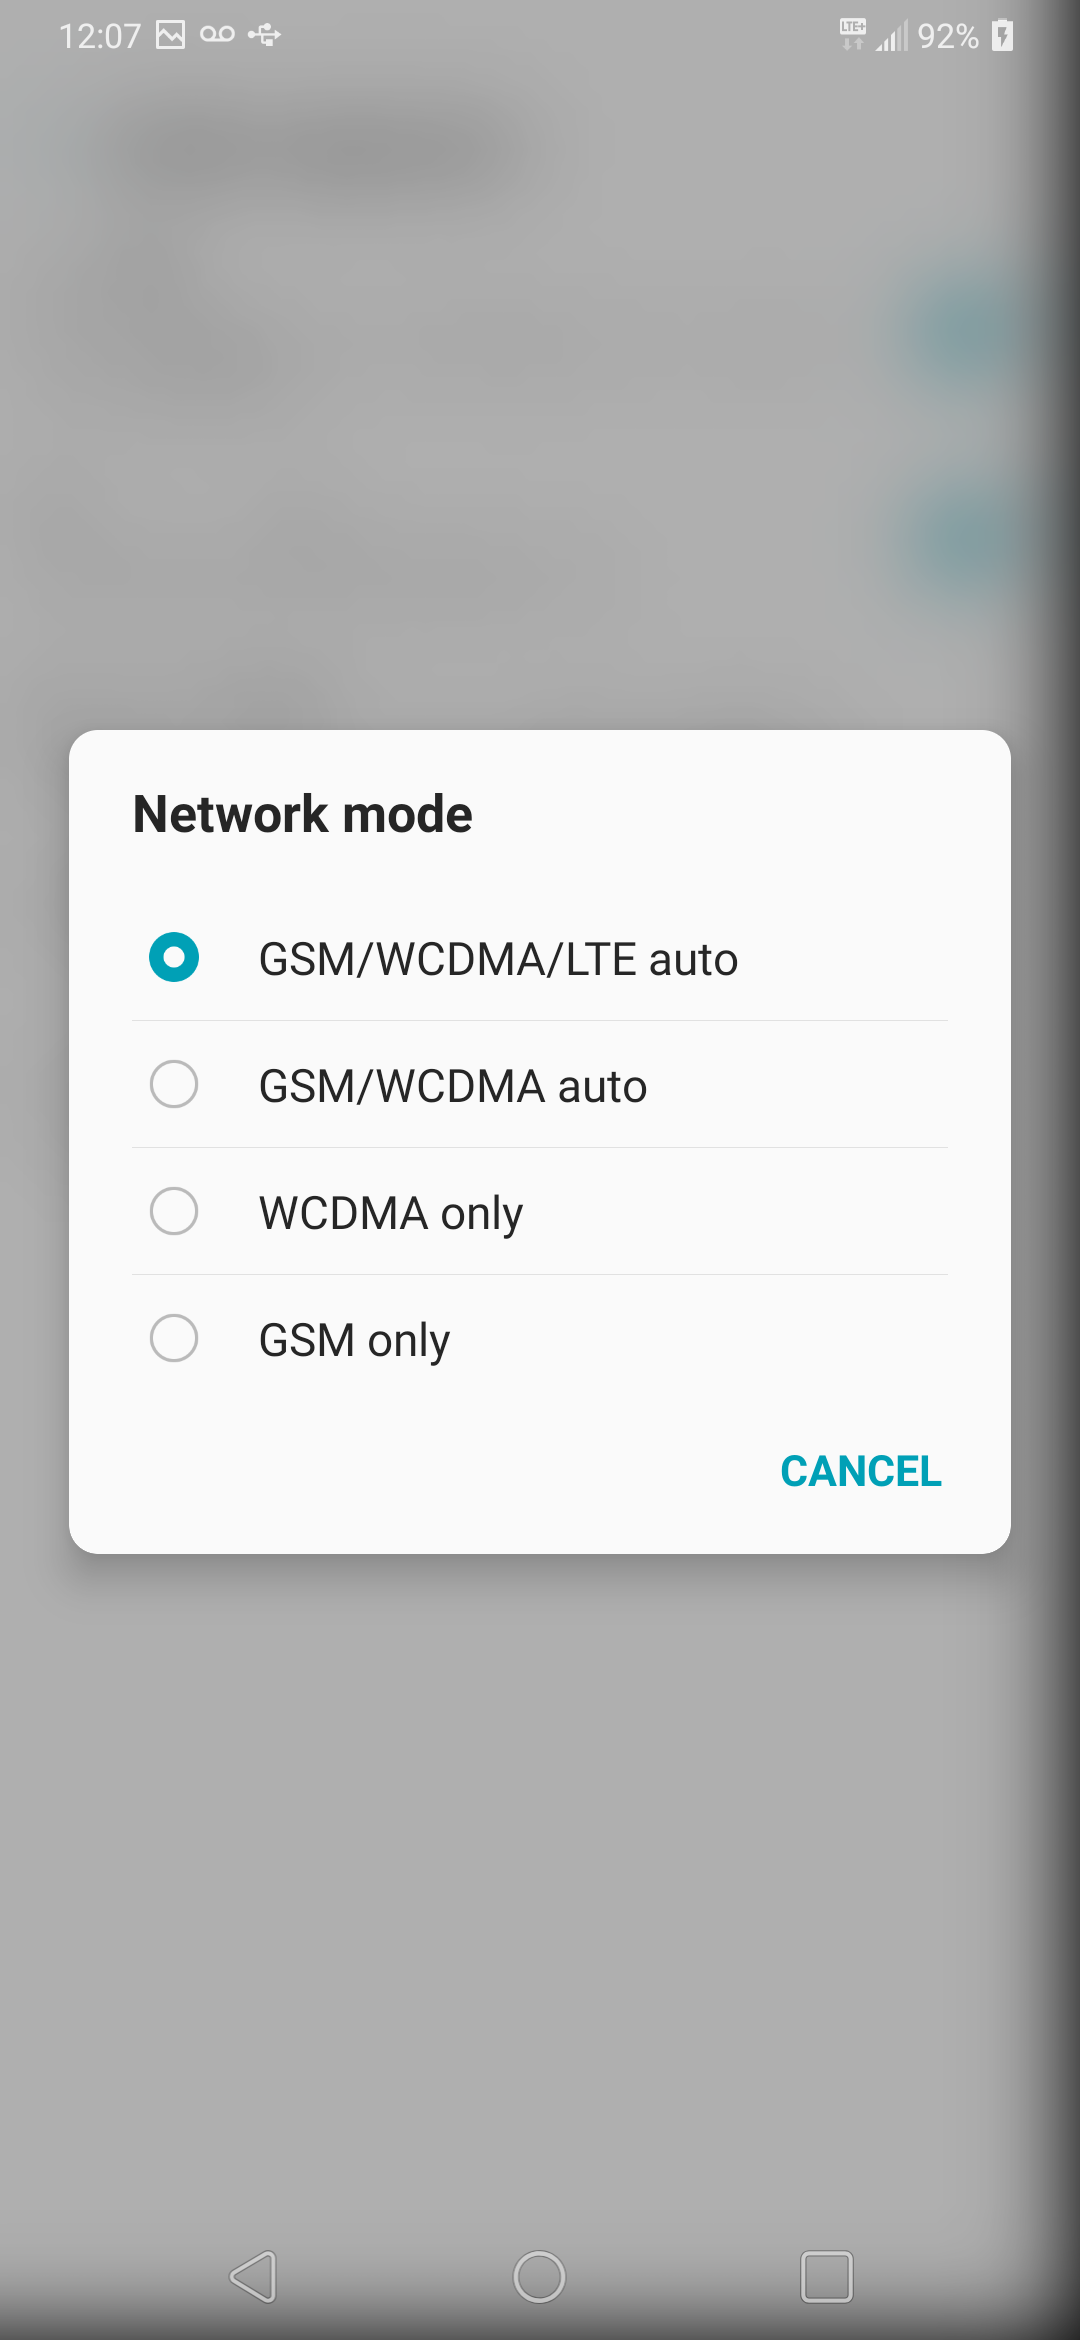 Touch the desired option, e.g., GSM/WCDMA/LTE auto.